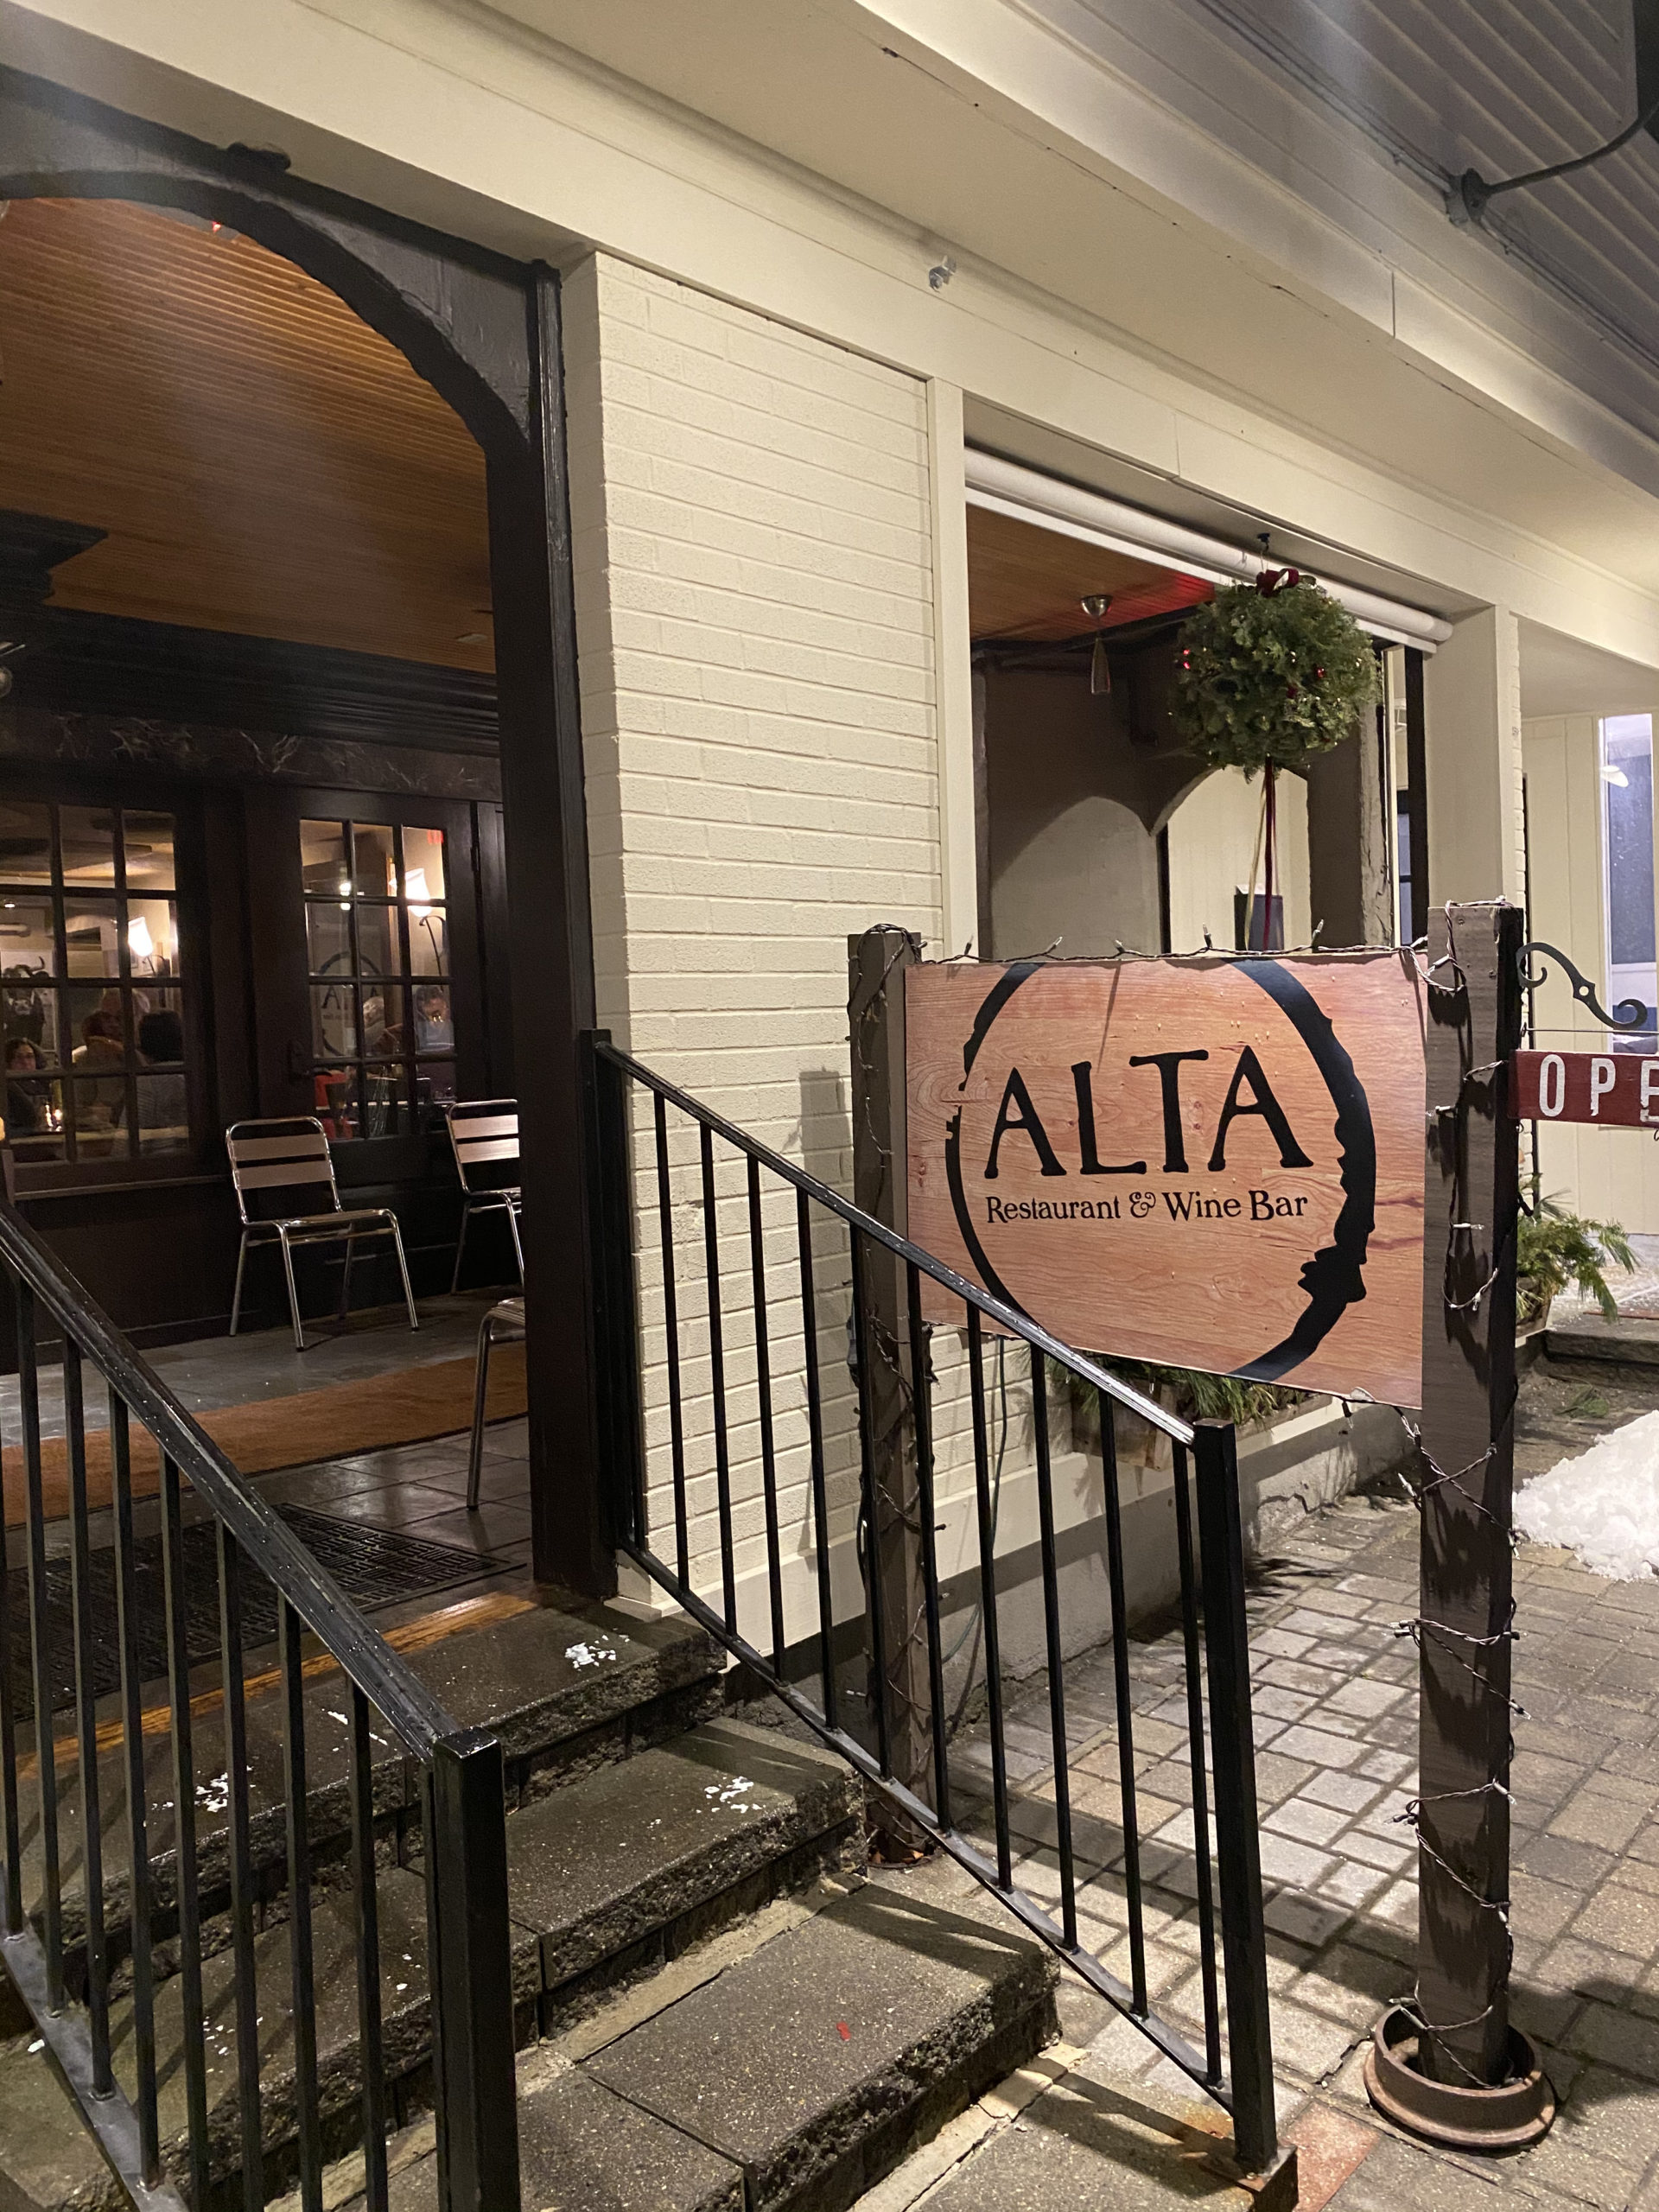 You are currently viewing Alta Restaurant & Wine Bar in Lenox, Massachusetts